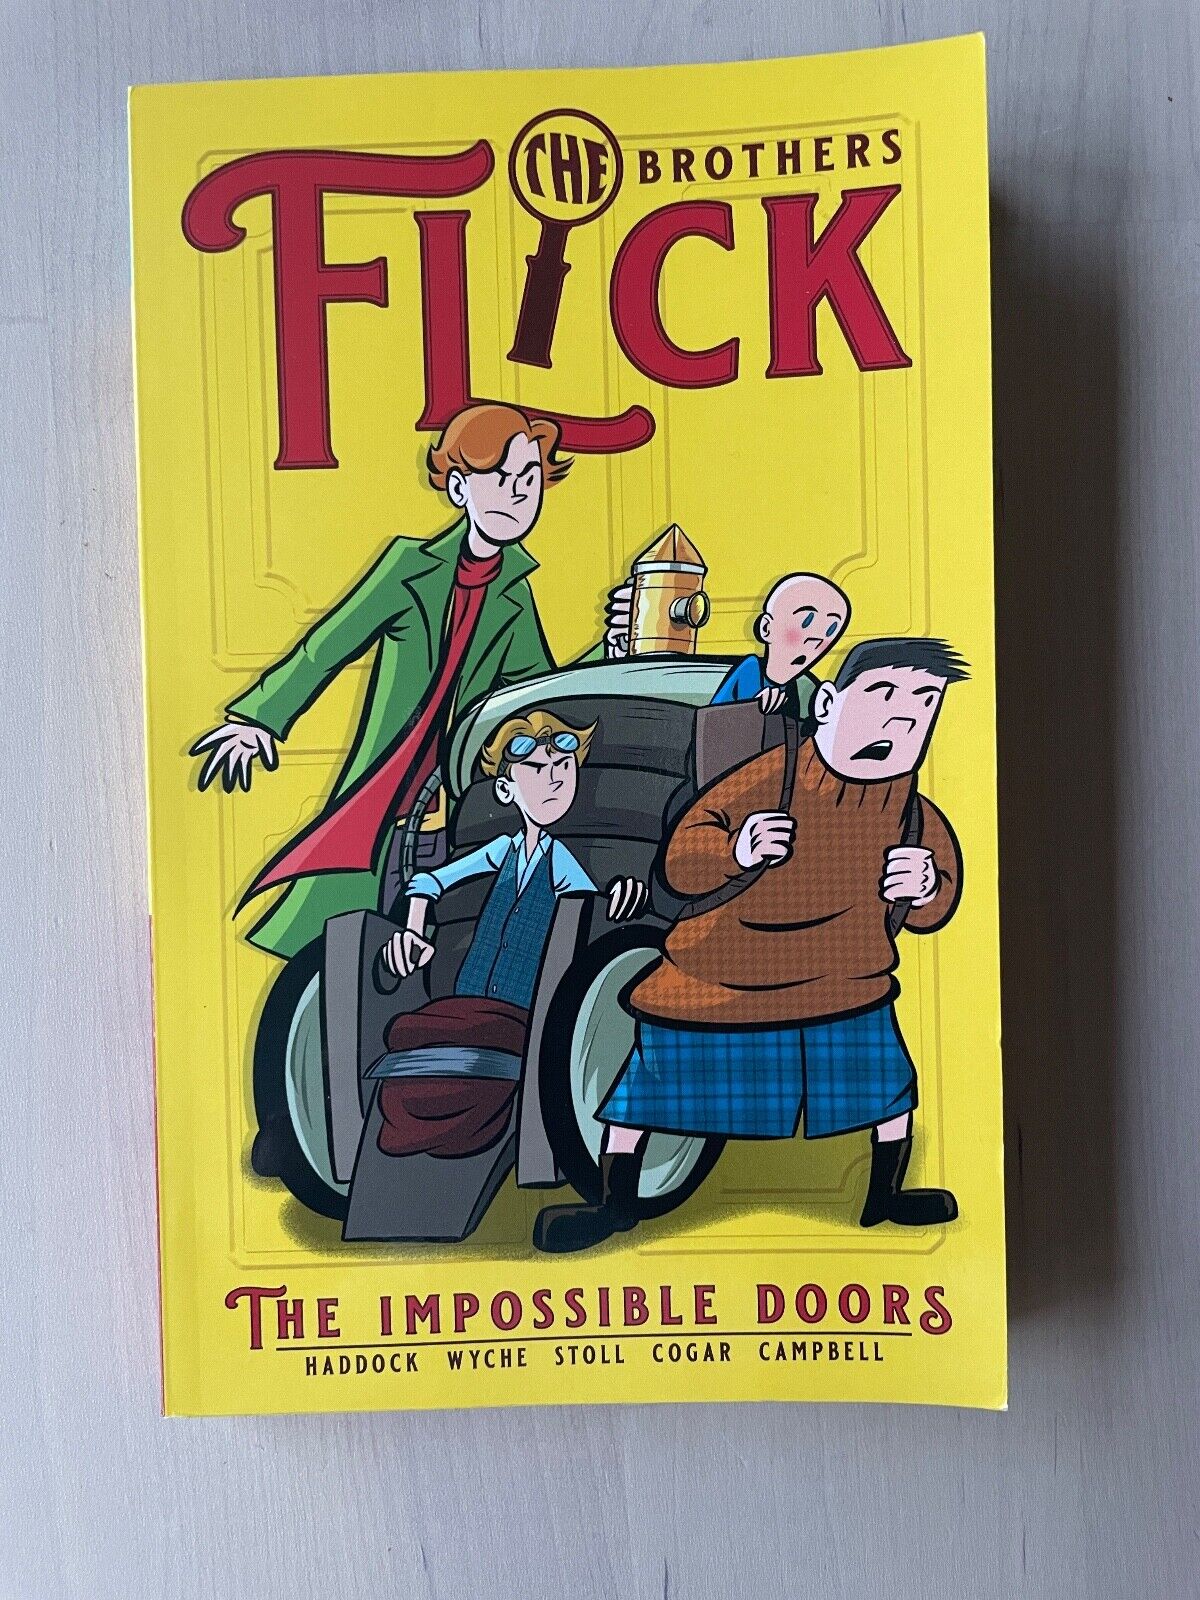 The Brothers Flick: The Impossible Doors TP